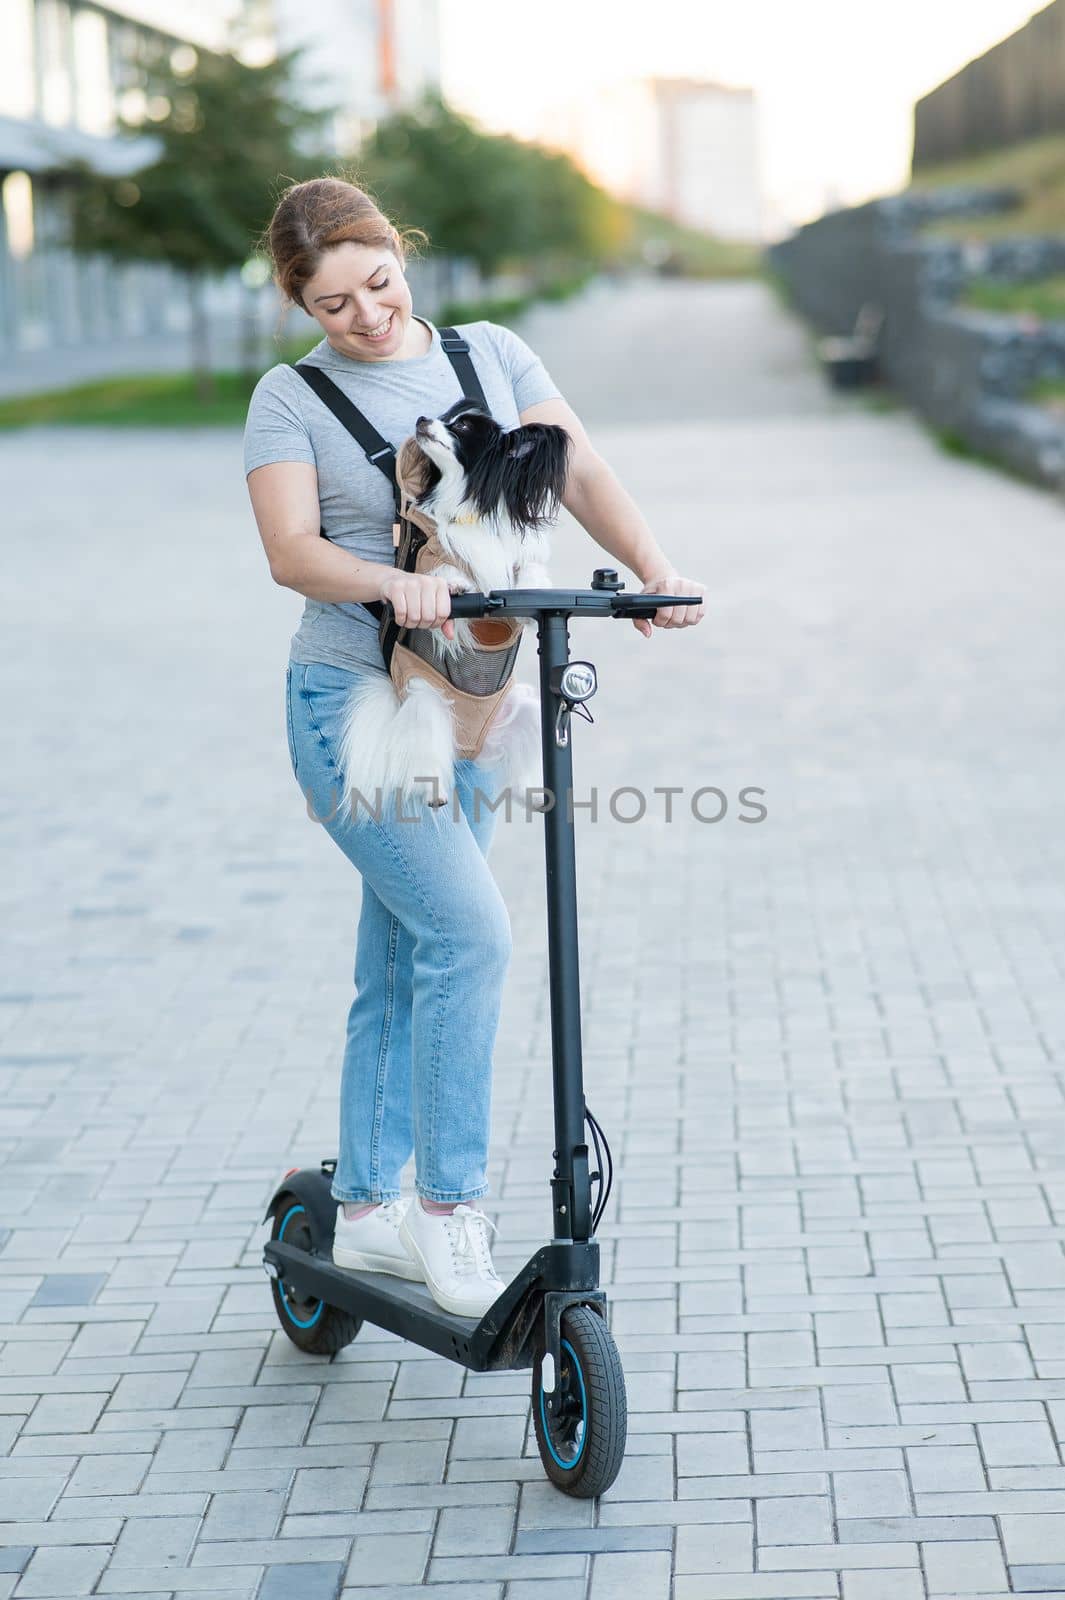 A woman rides an electric scooter with a dog in a backpack. Pappilion Spaniel Continental in a sling. Vertical